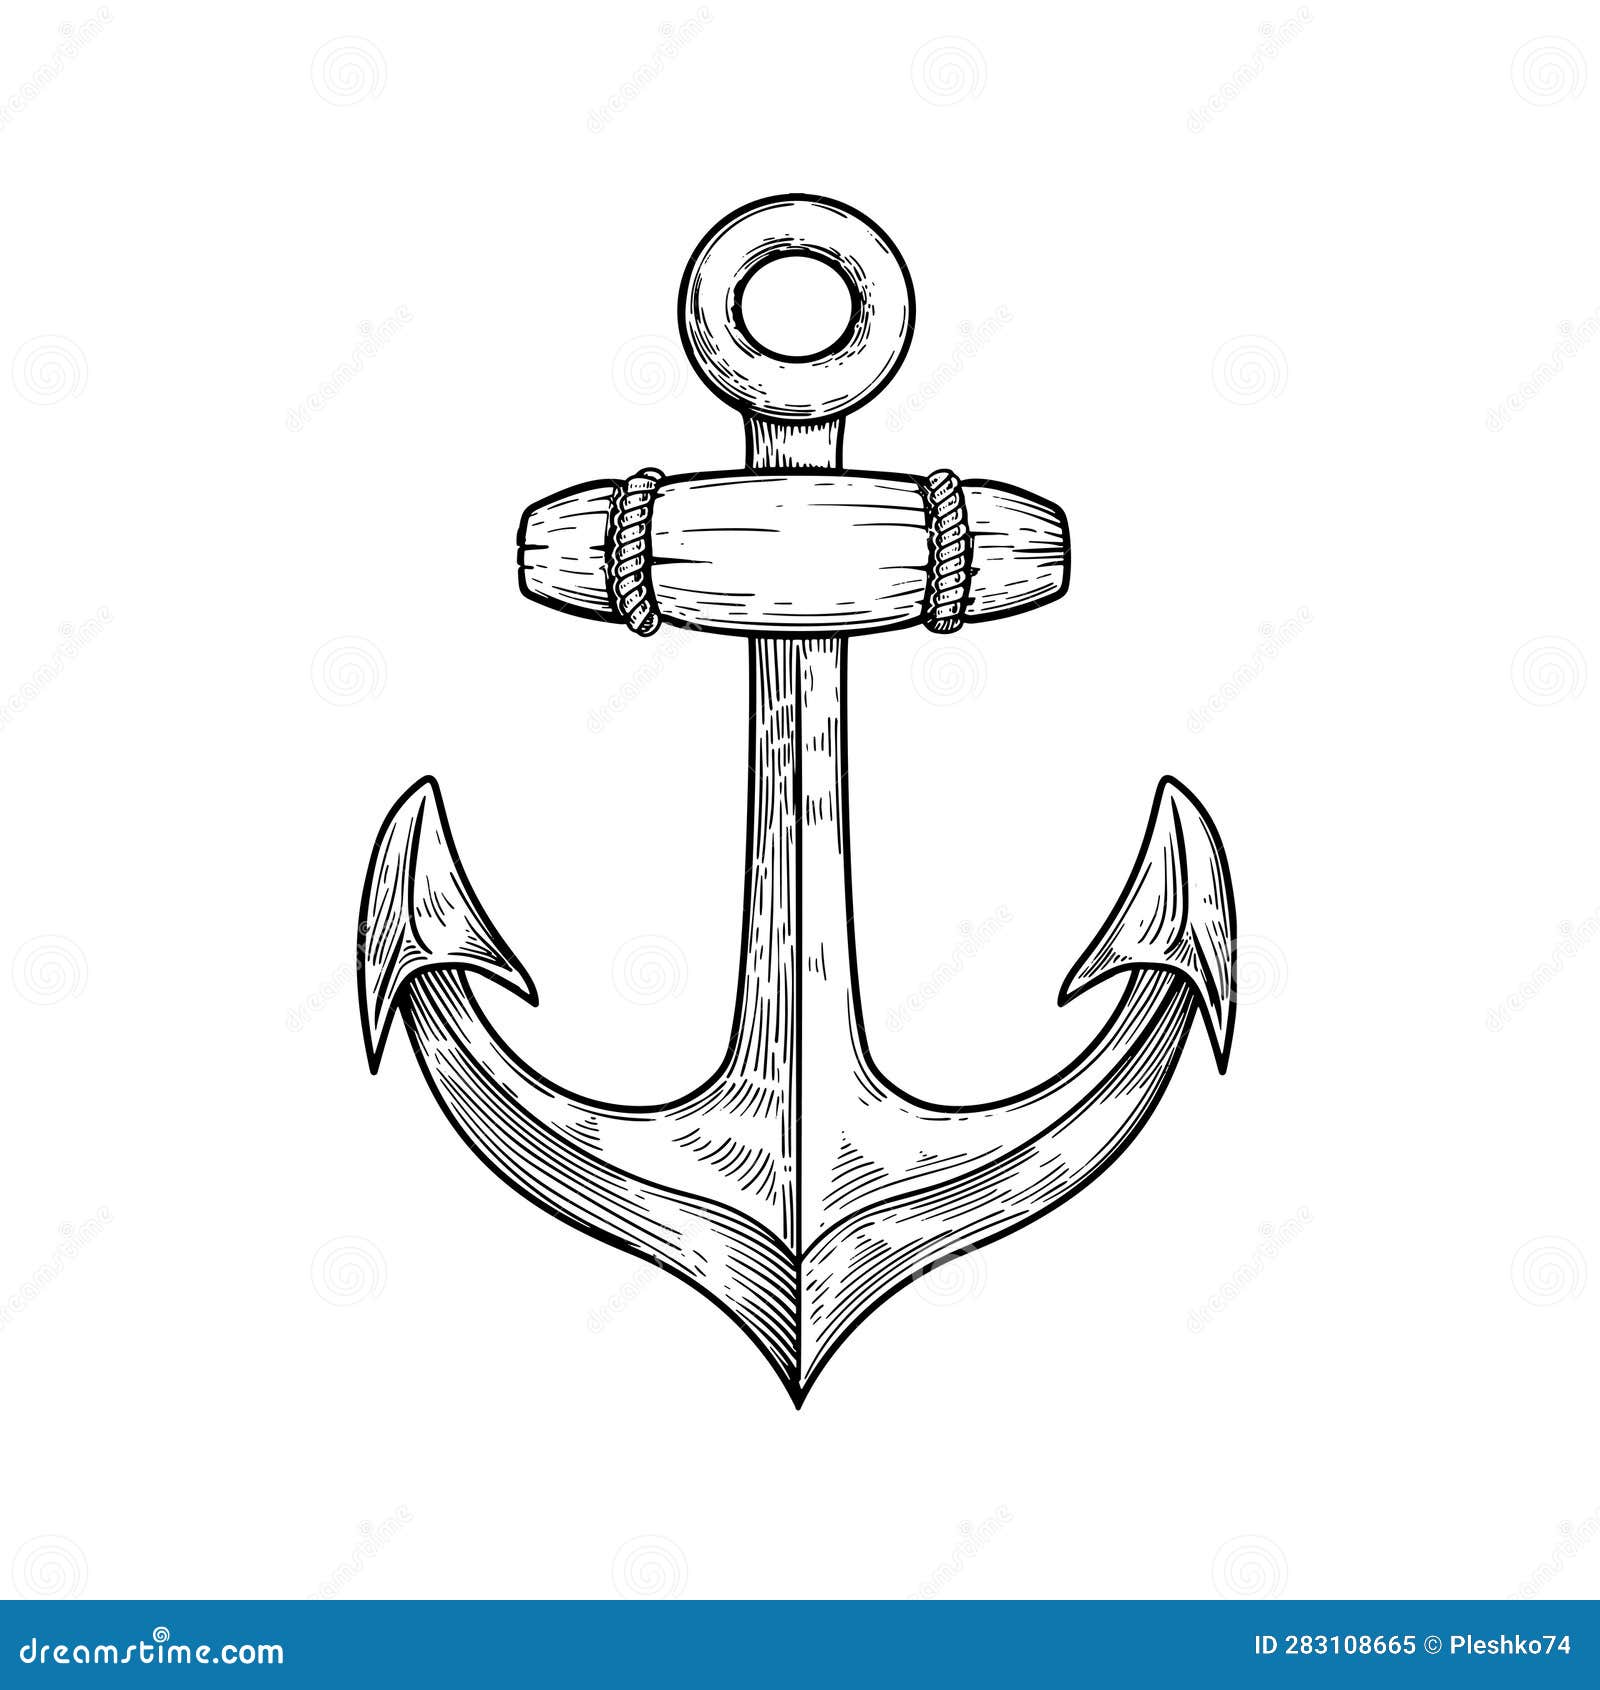 Sea Anchor. Ship Equipment in Sketch Hand Drawn Style. Best for Tattoo ...